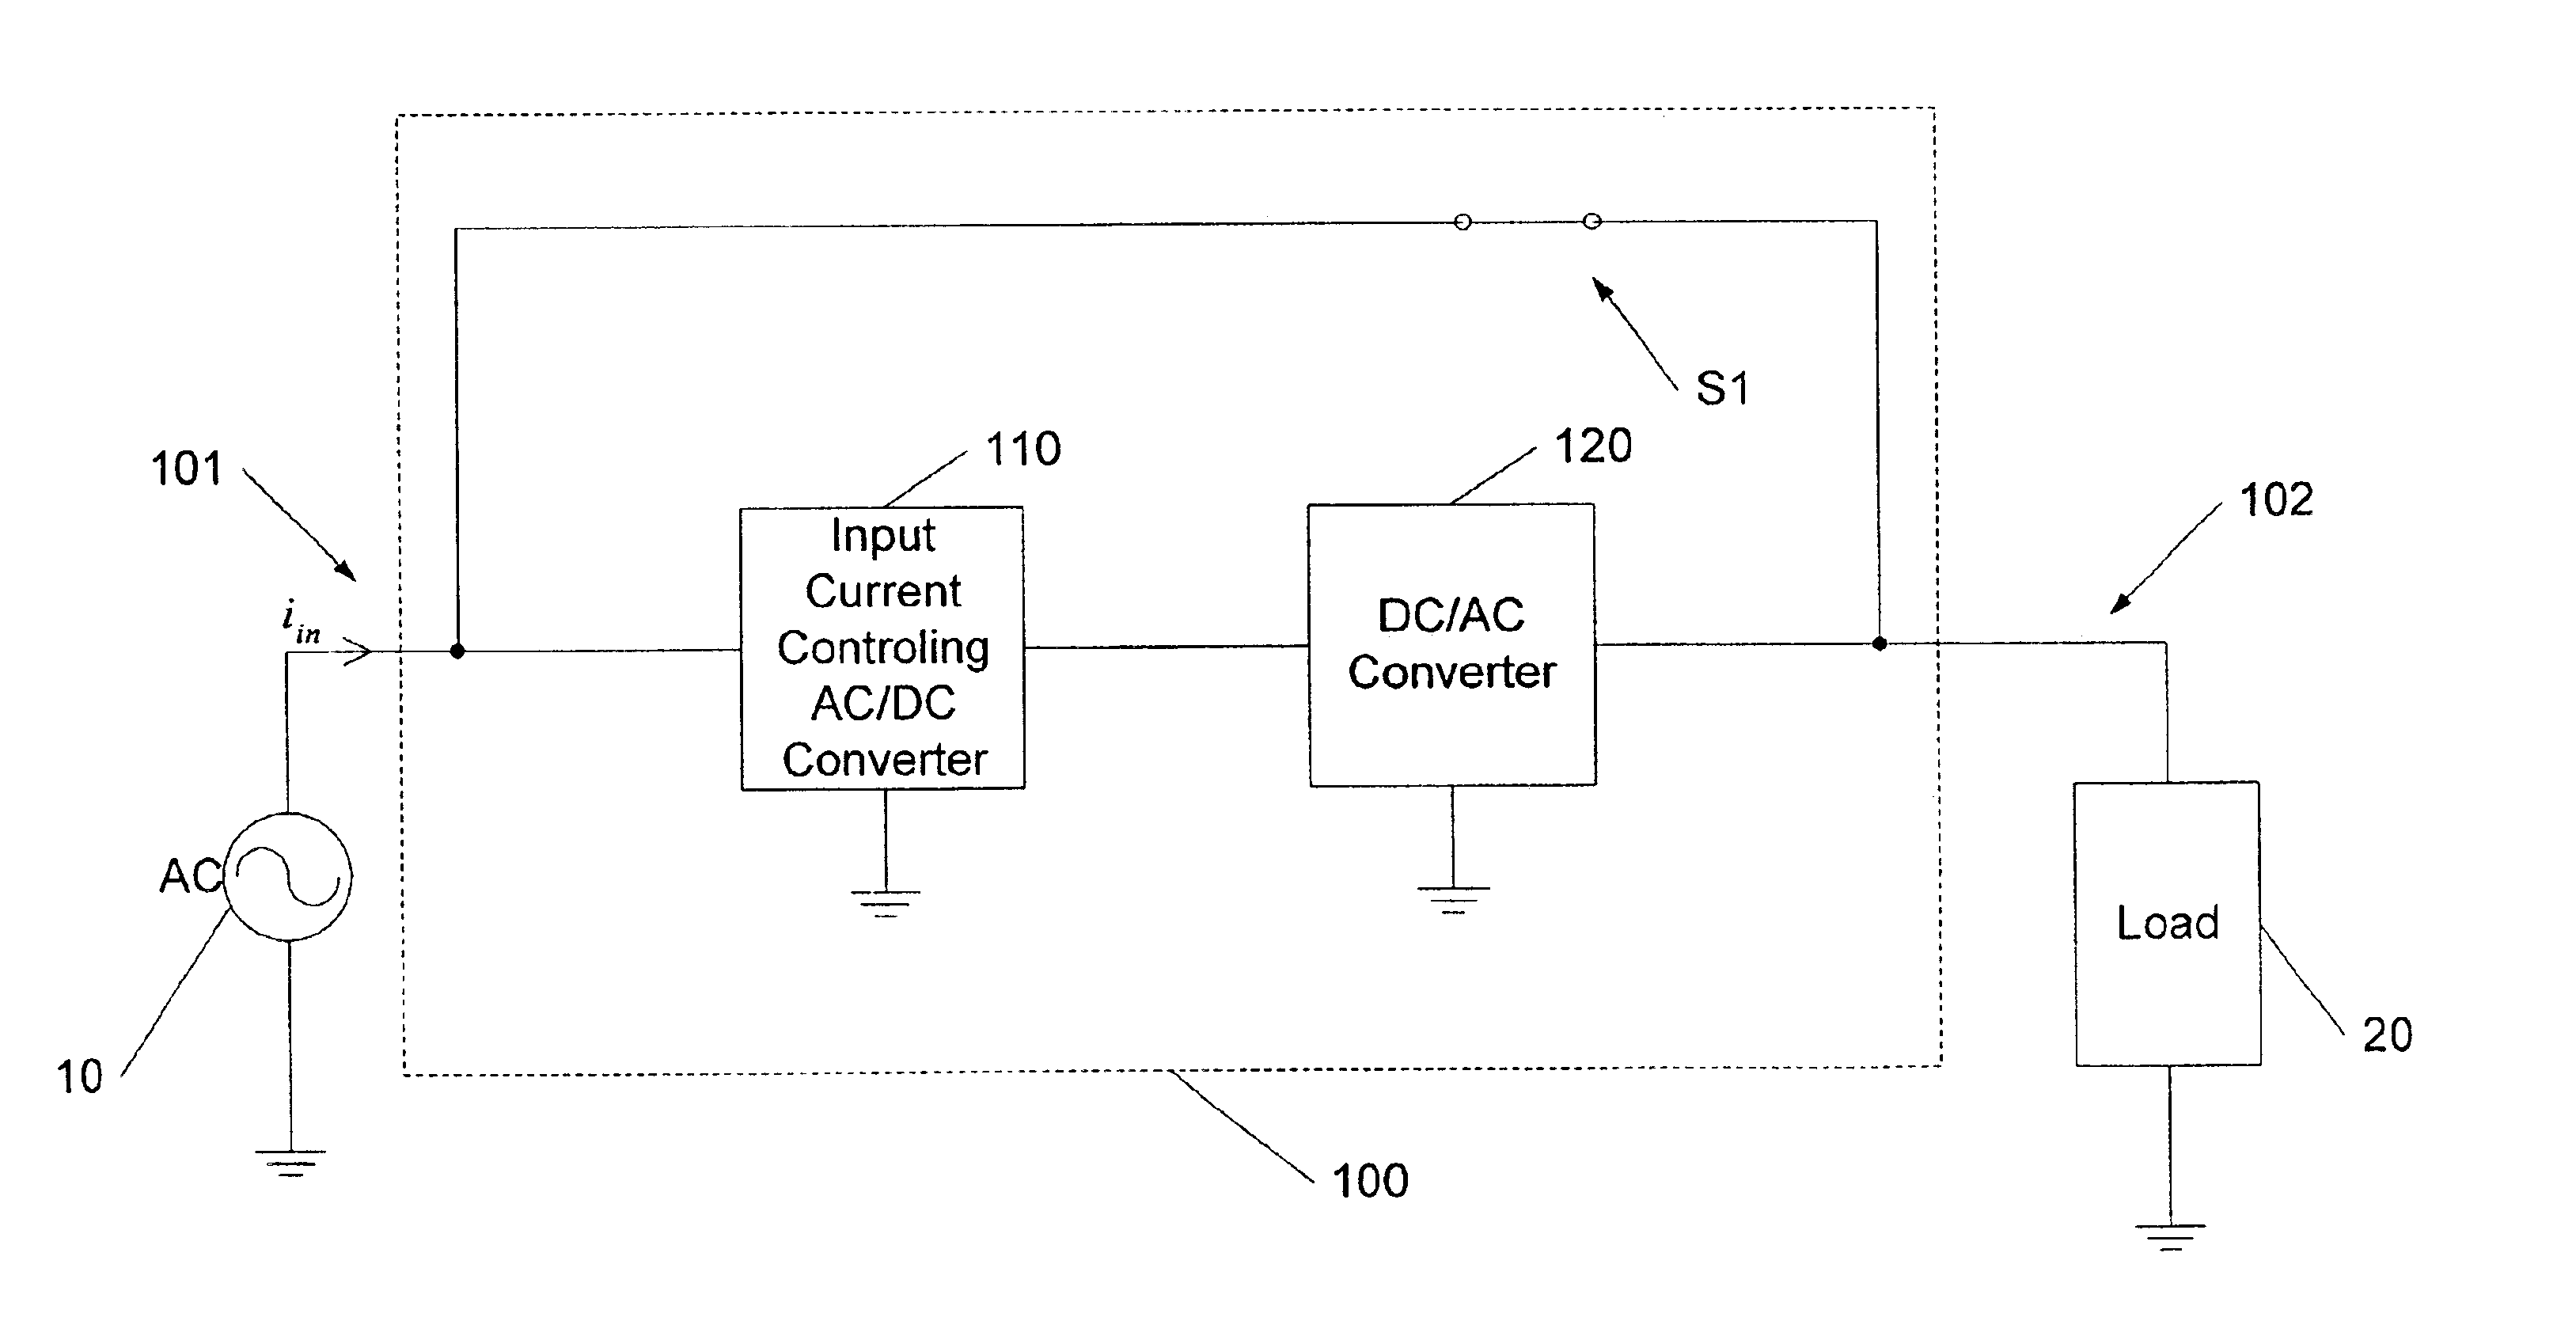 Power supply apparatus and methods with power-factor correcting bypass mode